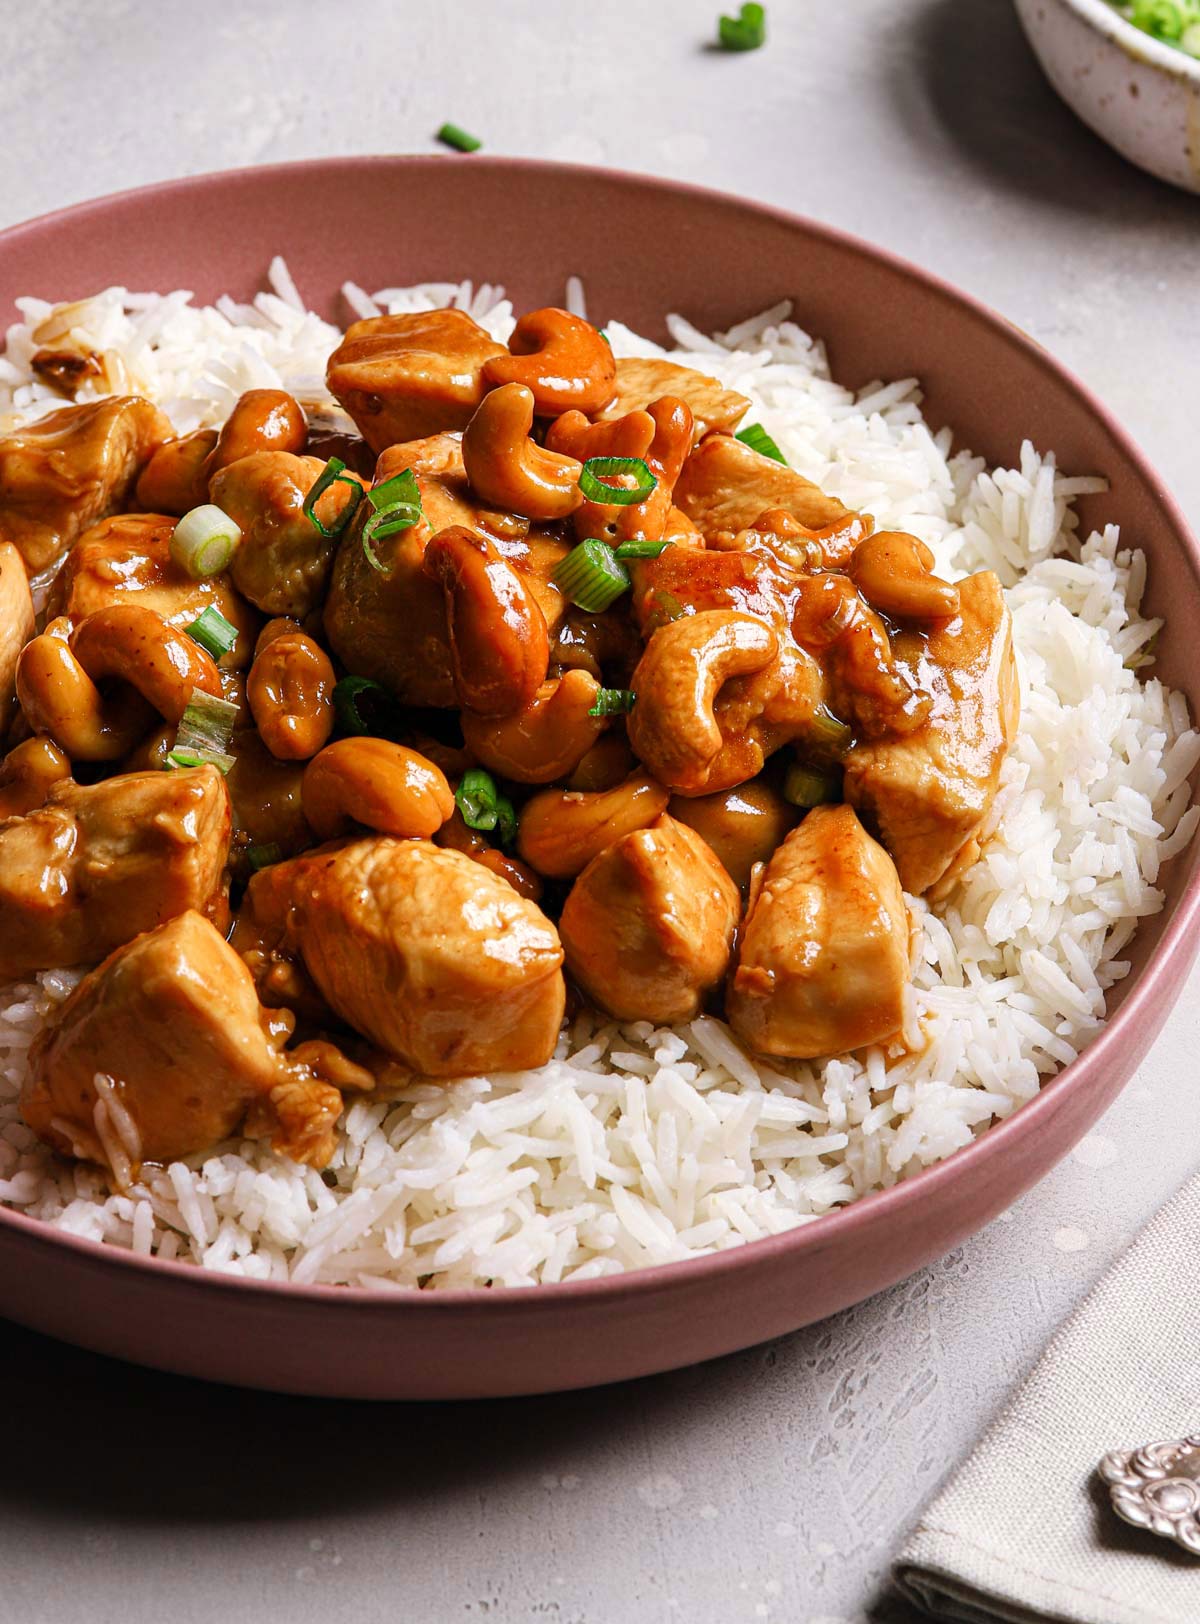 Stir-fried chicken with cashews served over white rice with green onions.